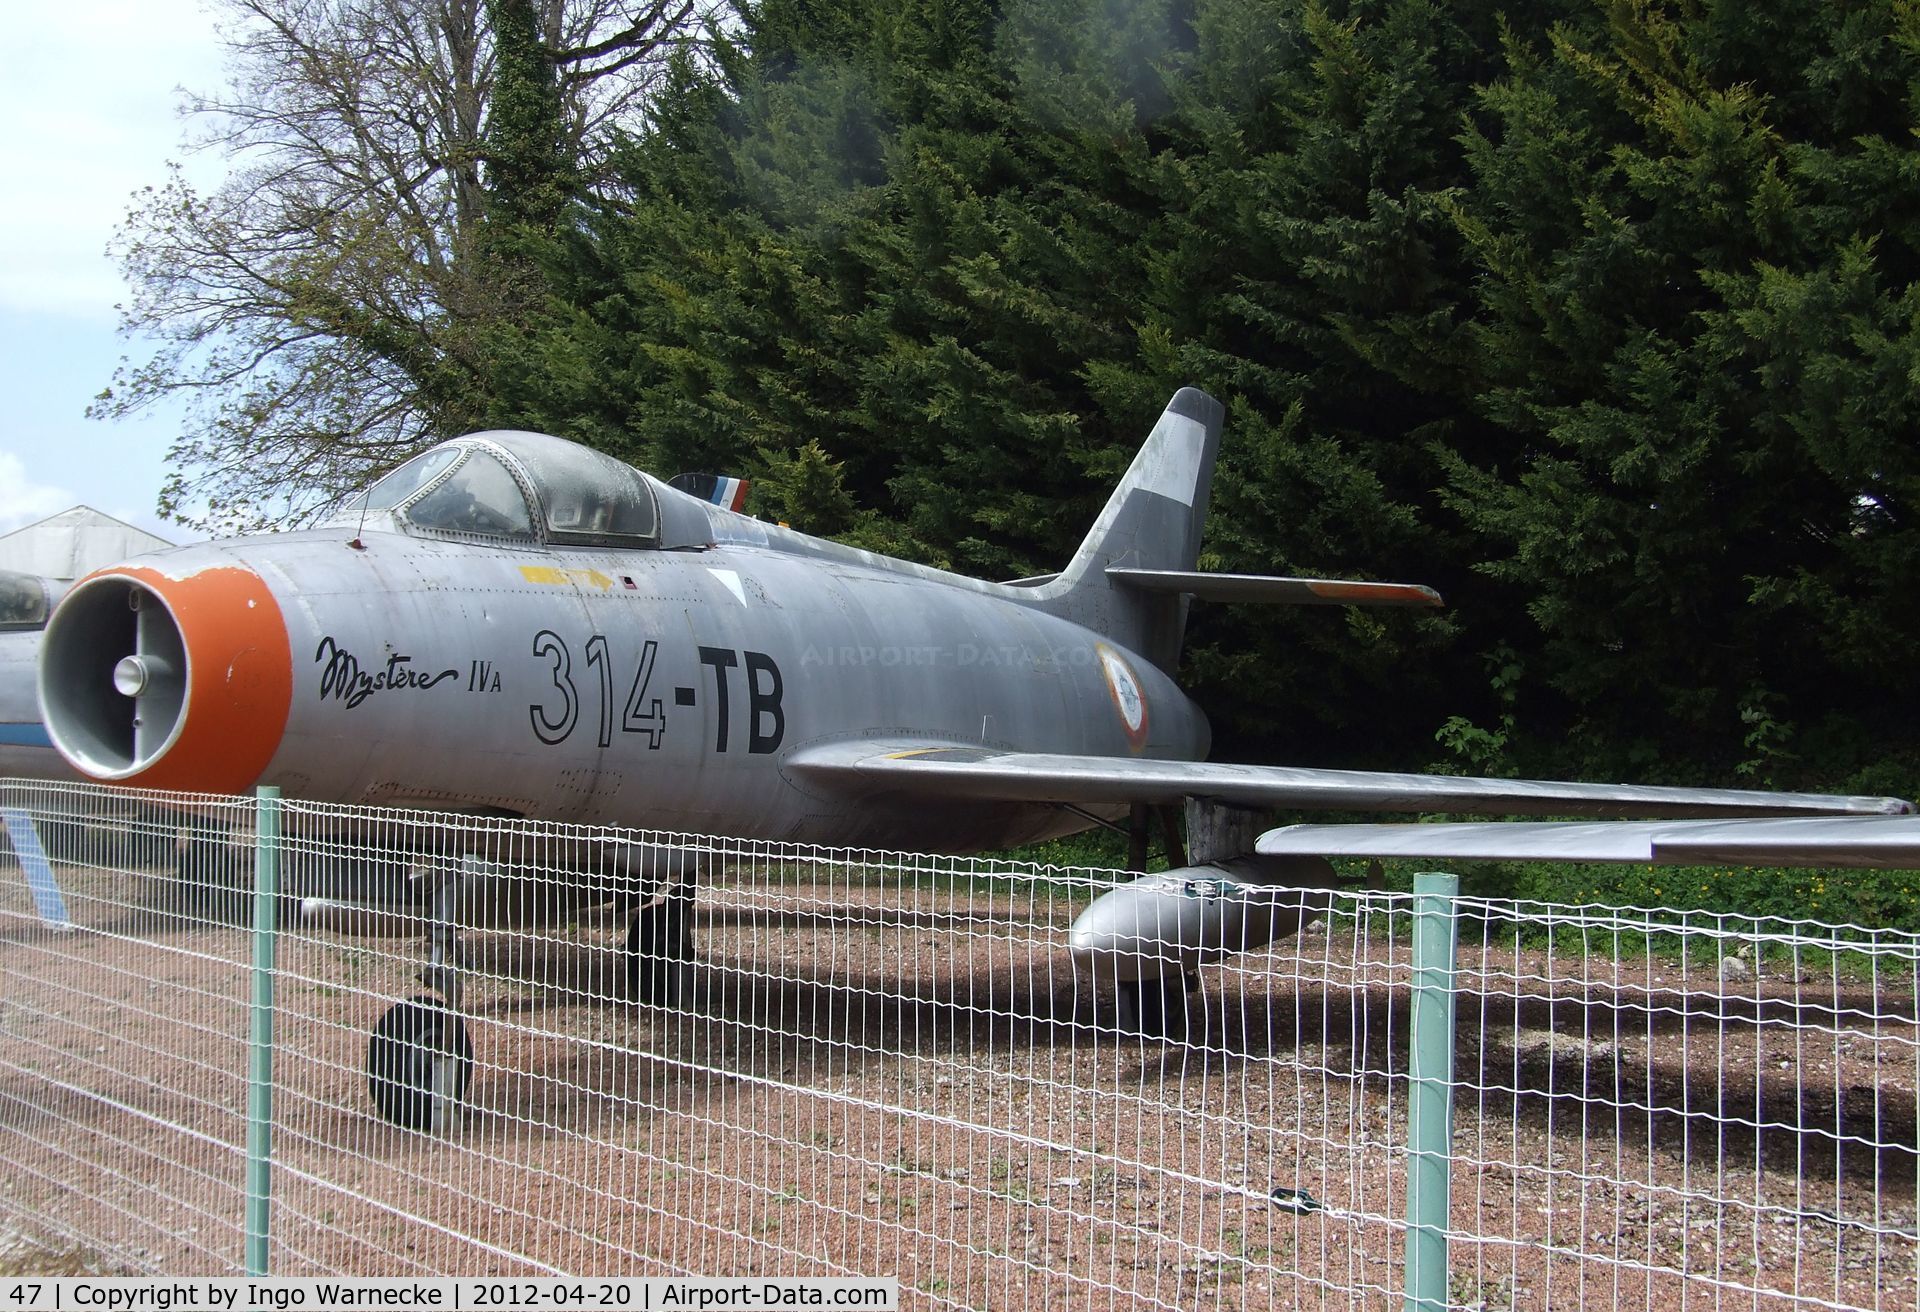 47, Dassault Mystere IVA C/N 47, Dassault Mystere IV A at the Musee de l'Aviation du Chateau, Savigny-les-Beaune